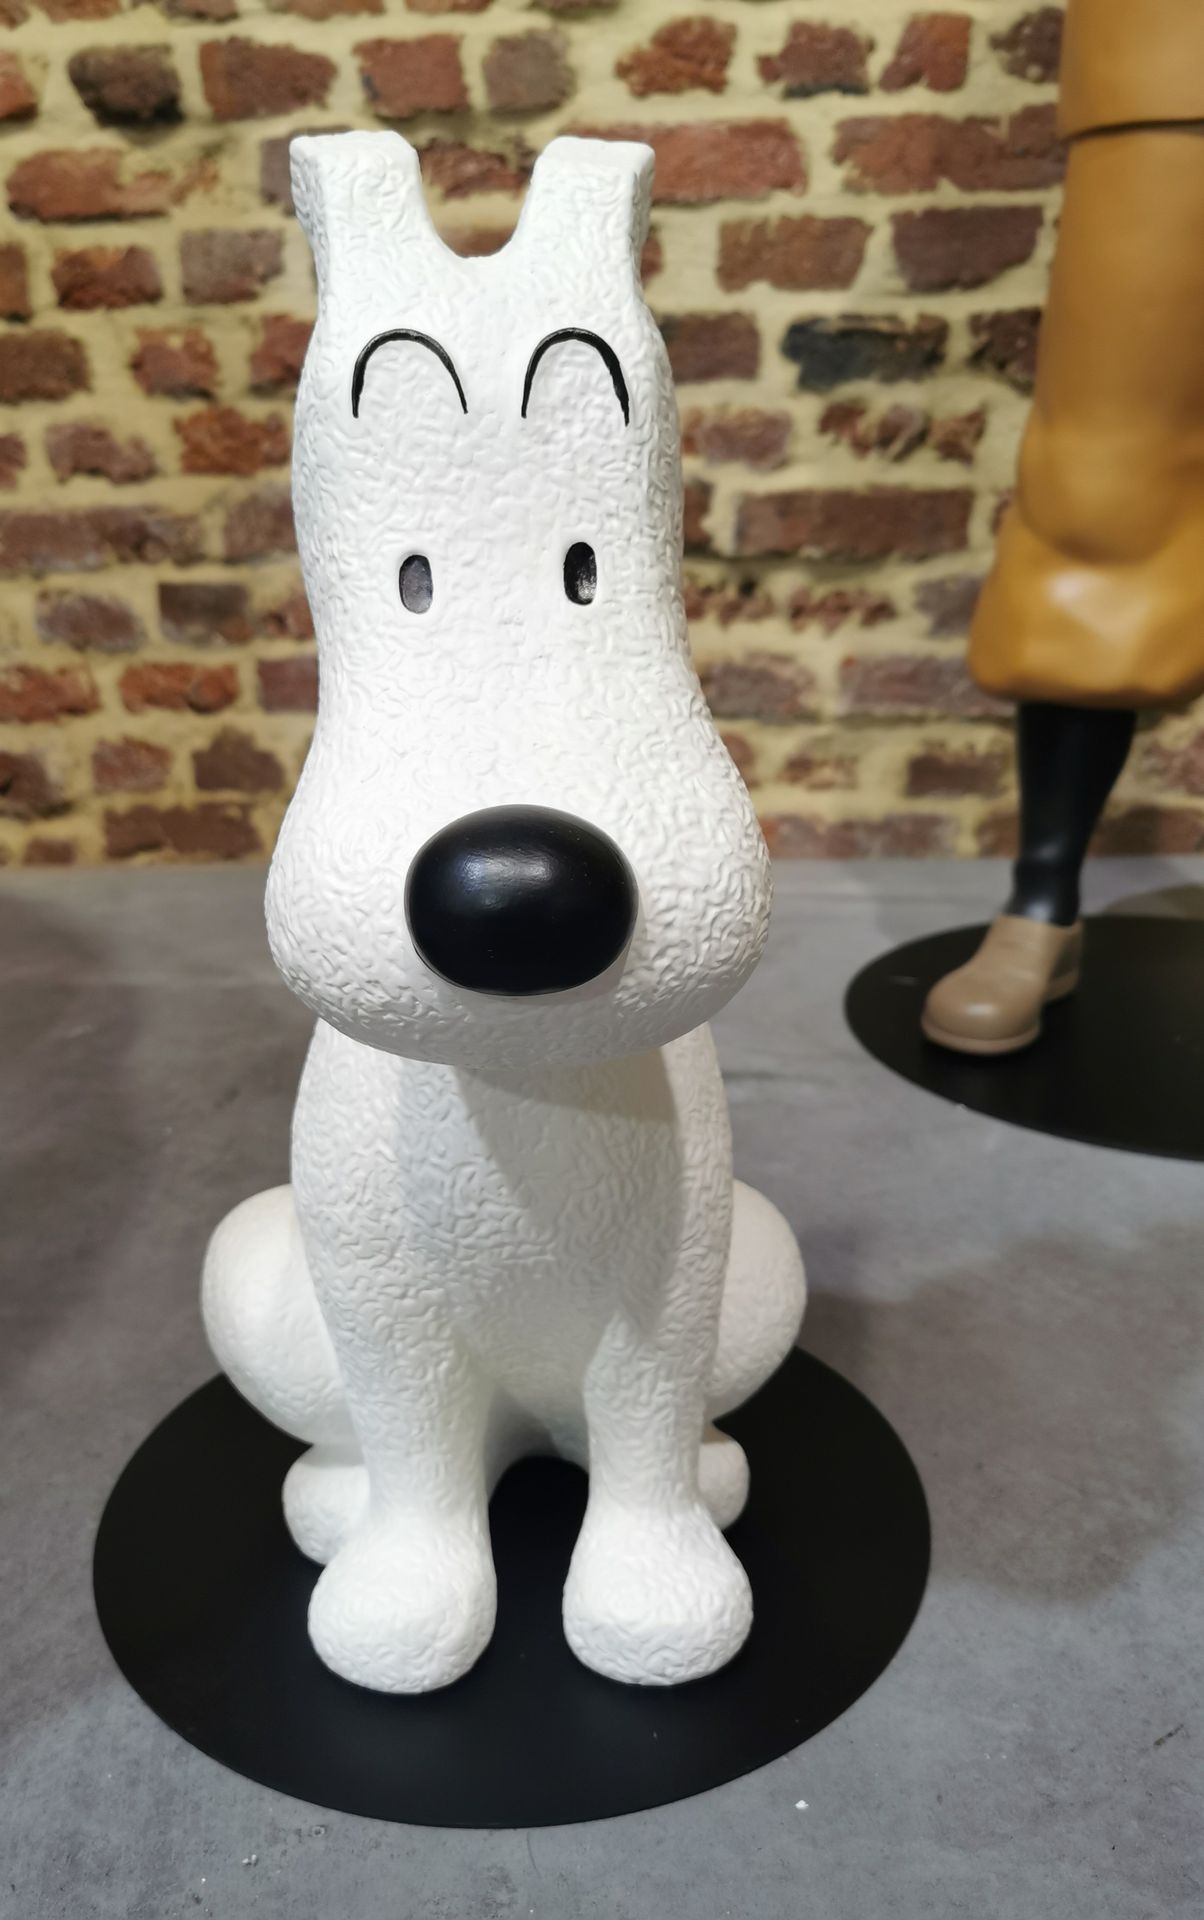 Tintin & Hergé Bobby (Moulinsart). A must have Bobby from Moulinsart, who measur&hellip;